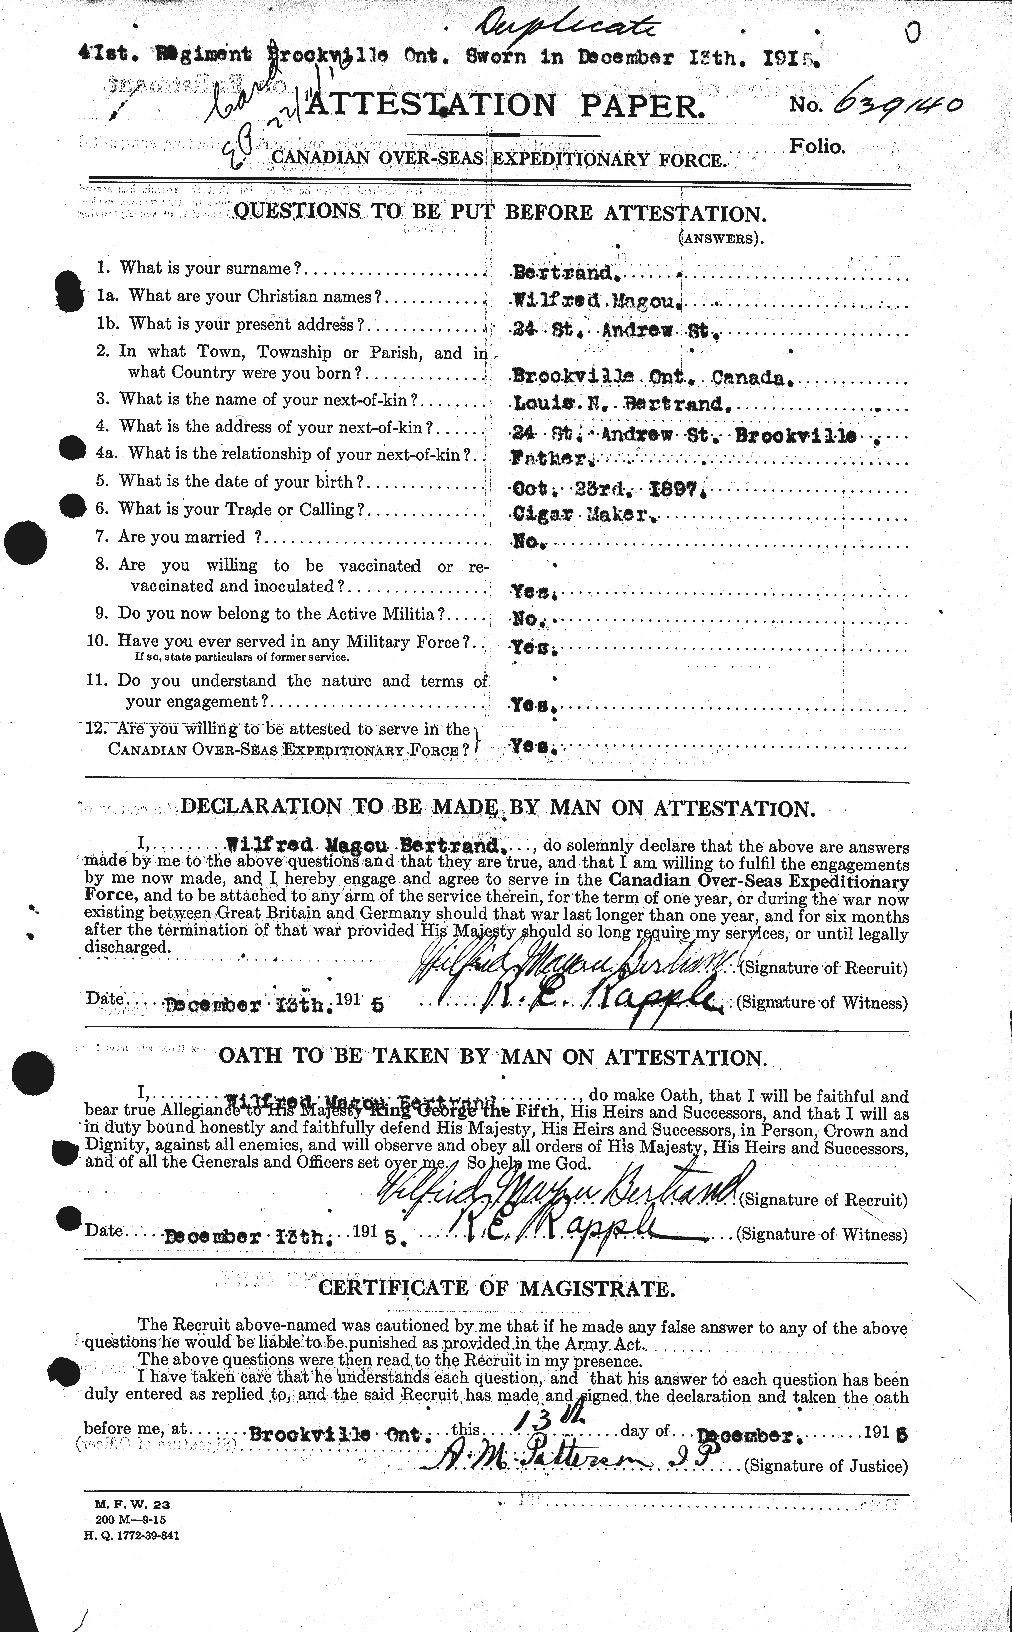 Personnel Records of the First World War - CEF 238848a